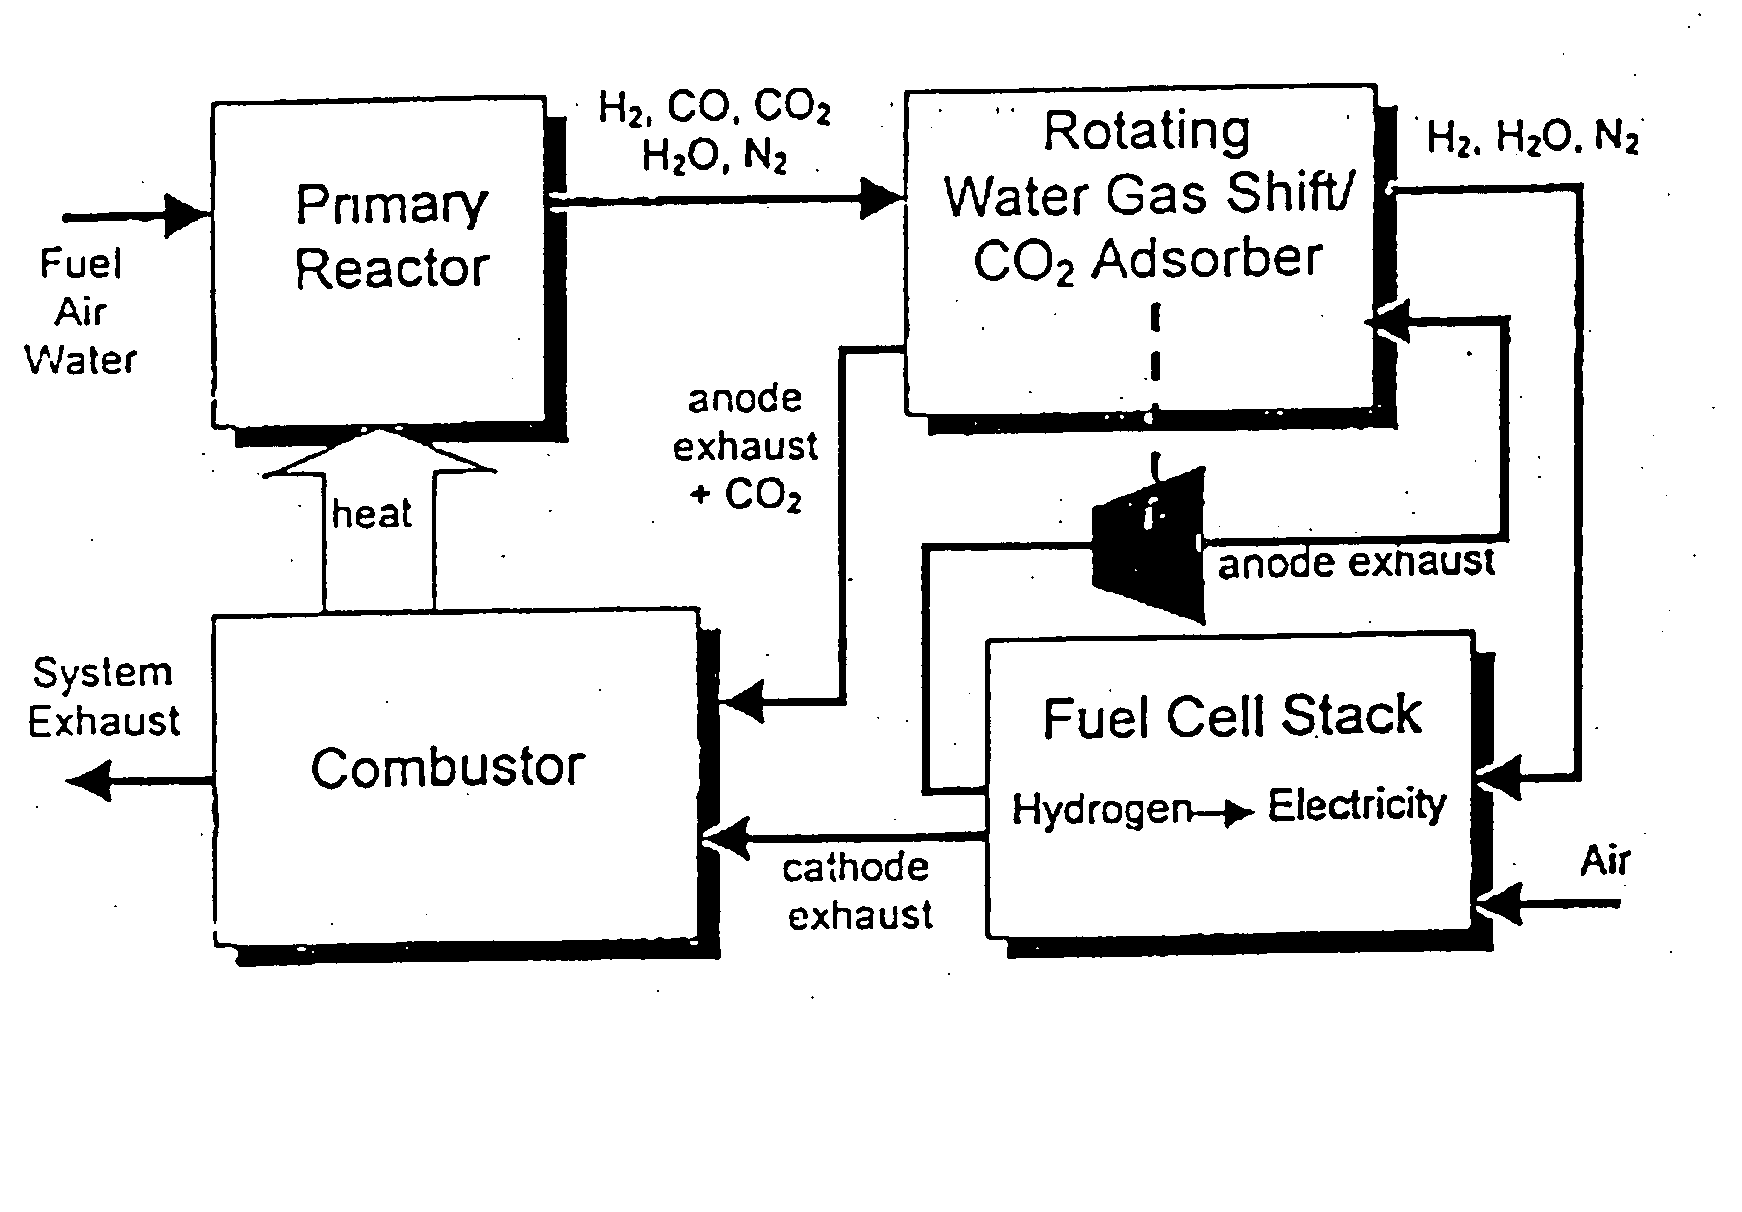 Combined water gas shift reactor/carbon dioxide adsorber for use in a fuel cell system